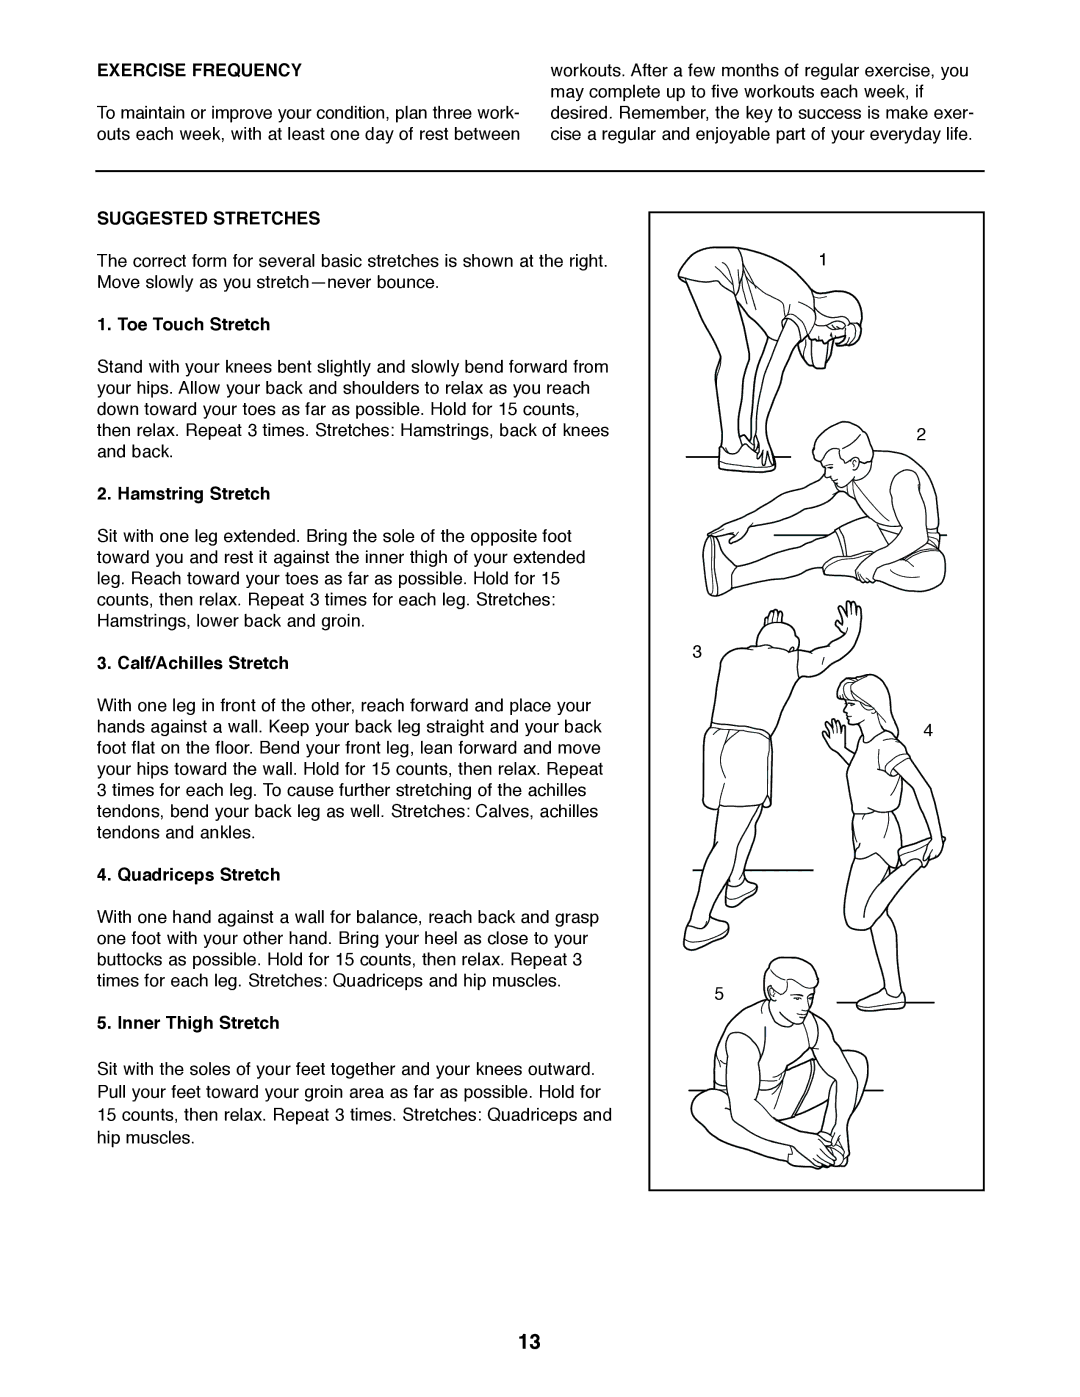 Weslo 831.283160 user manual Exercise Frequency, Suggested Stretches 